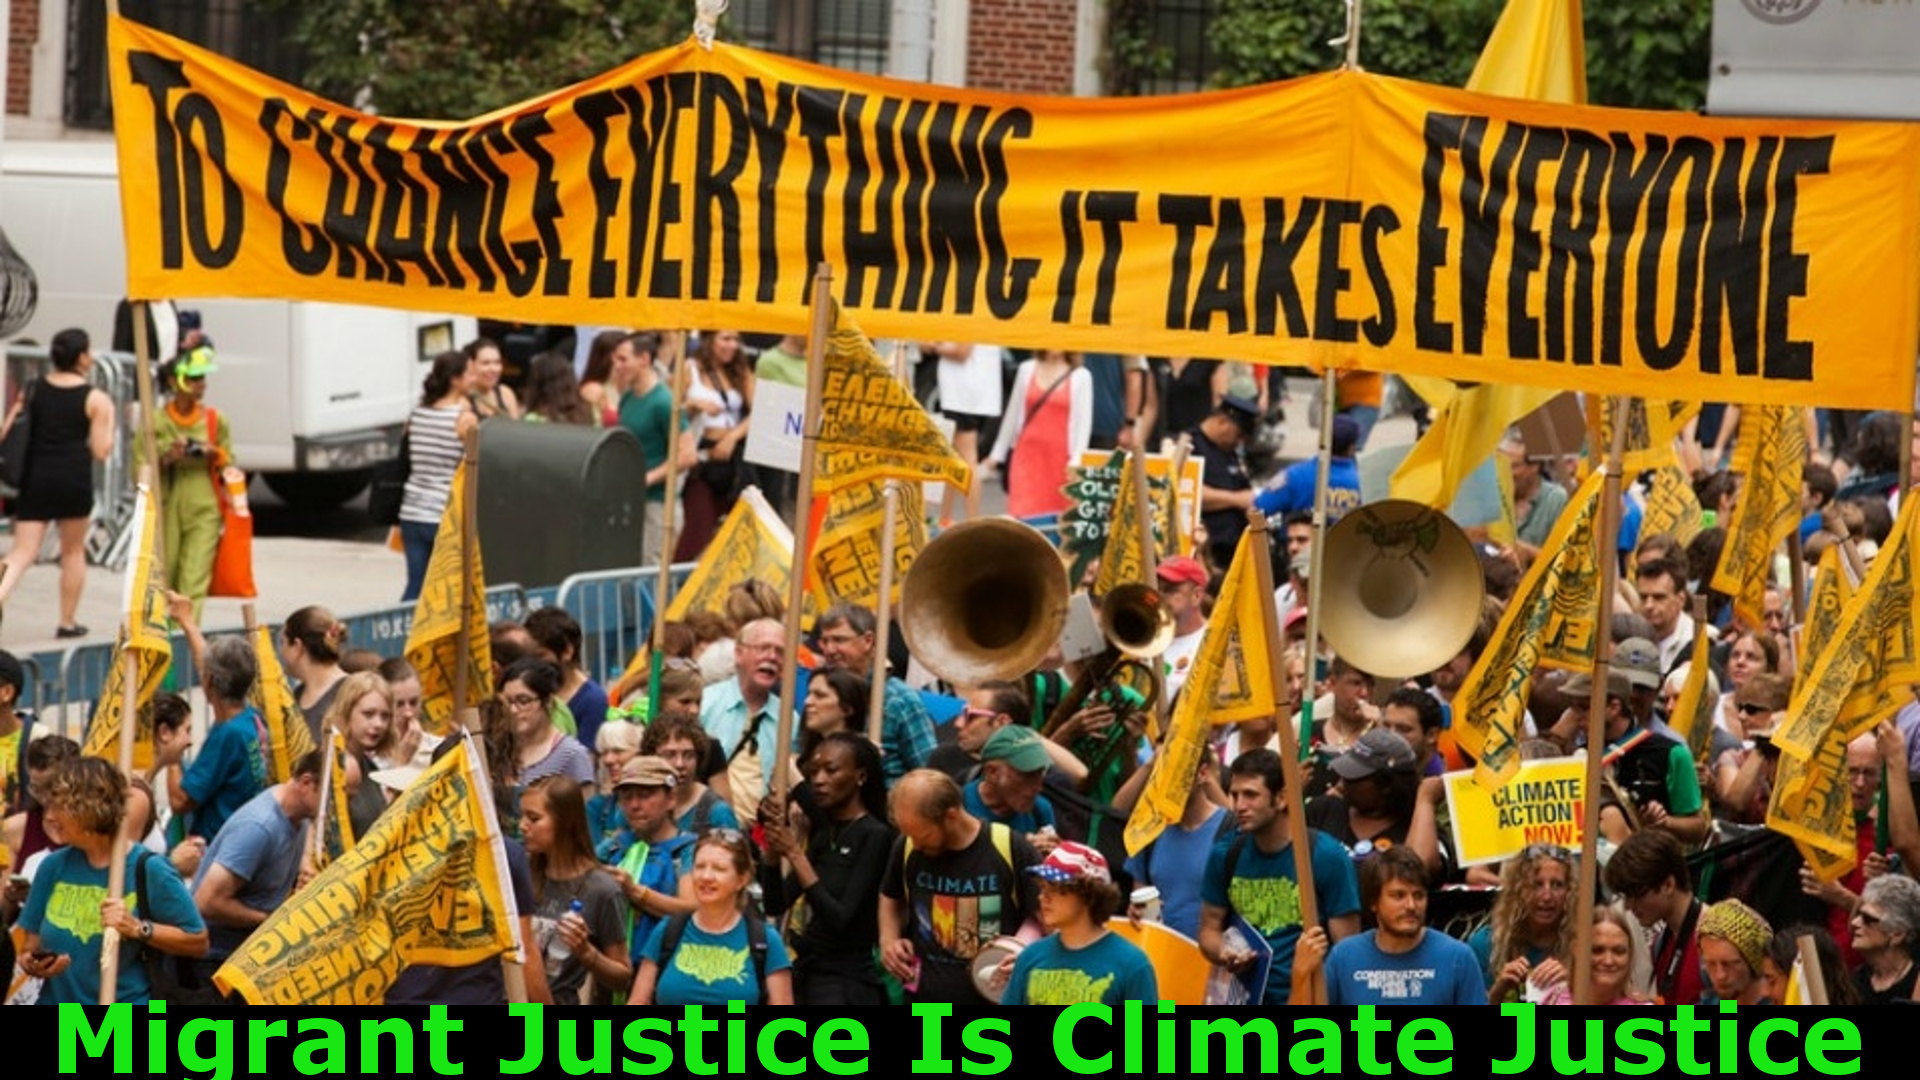 Migrant Justice Is Climate Justice [Event image credit: (remixed) South Bend Voice, CC BY-SA-2.0, https://creativecommons.org/licenses/by-sa/2.0/deed.en; courtesy of Wikimedia https://commons.wikimedia.org/wiki/File:People%27s_Climate_March_2014.jpg]